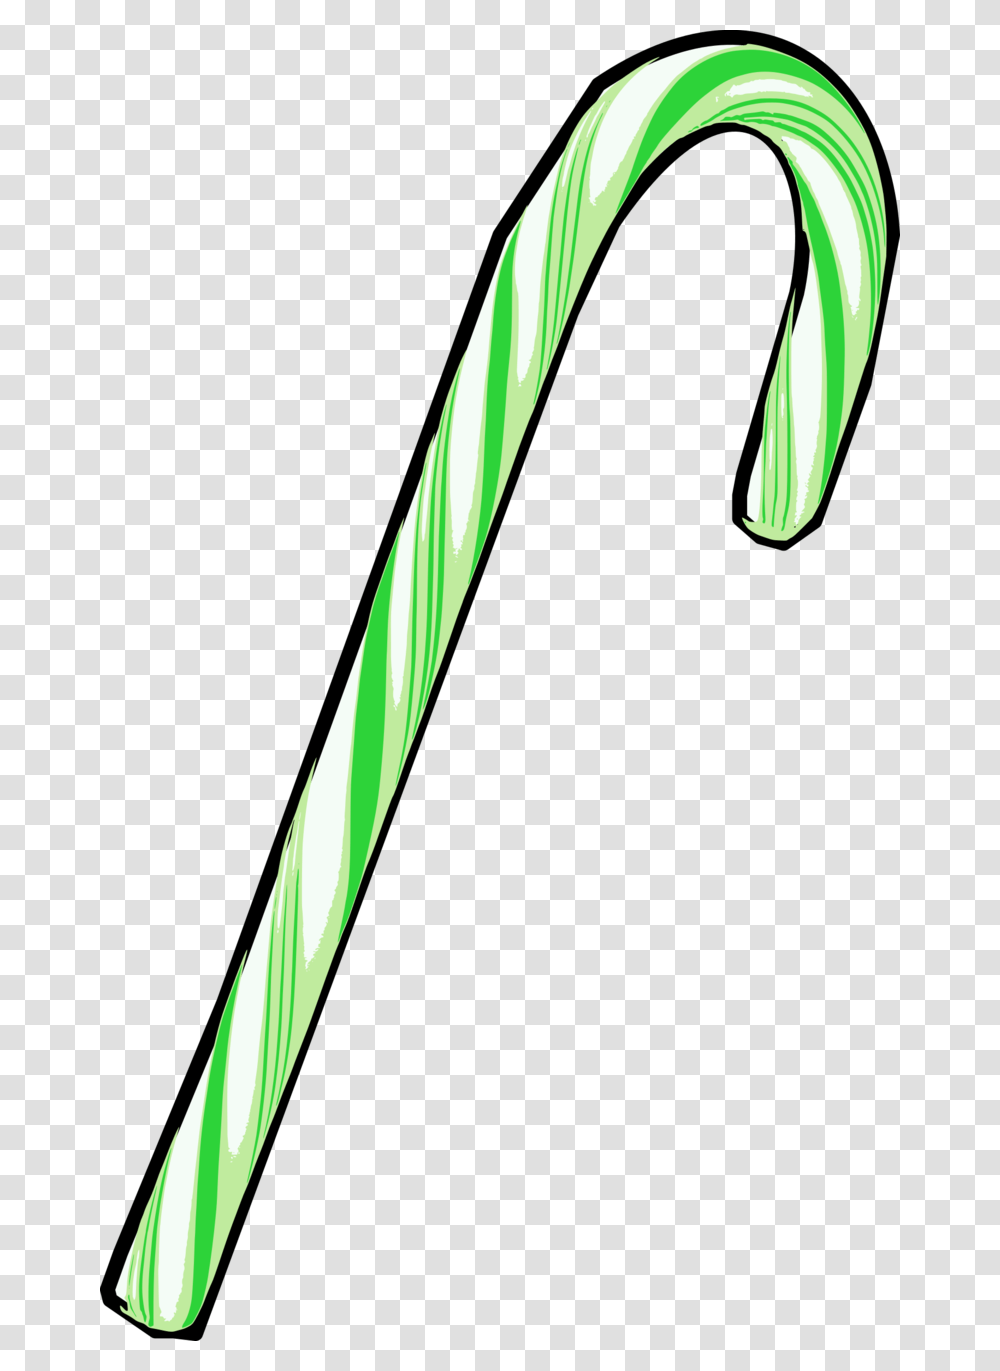 Green Candy Cane, Stick, Sword, Blade, Weapon Transparent Png